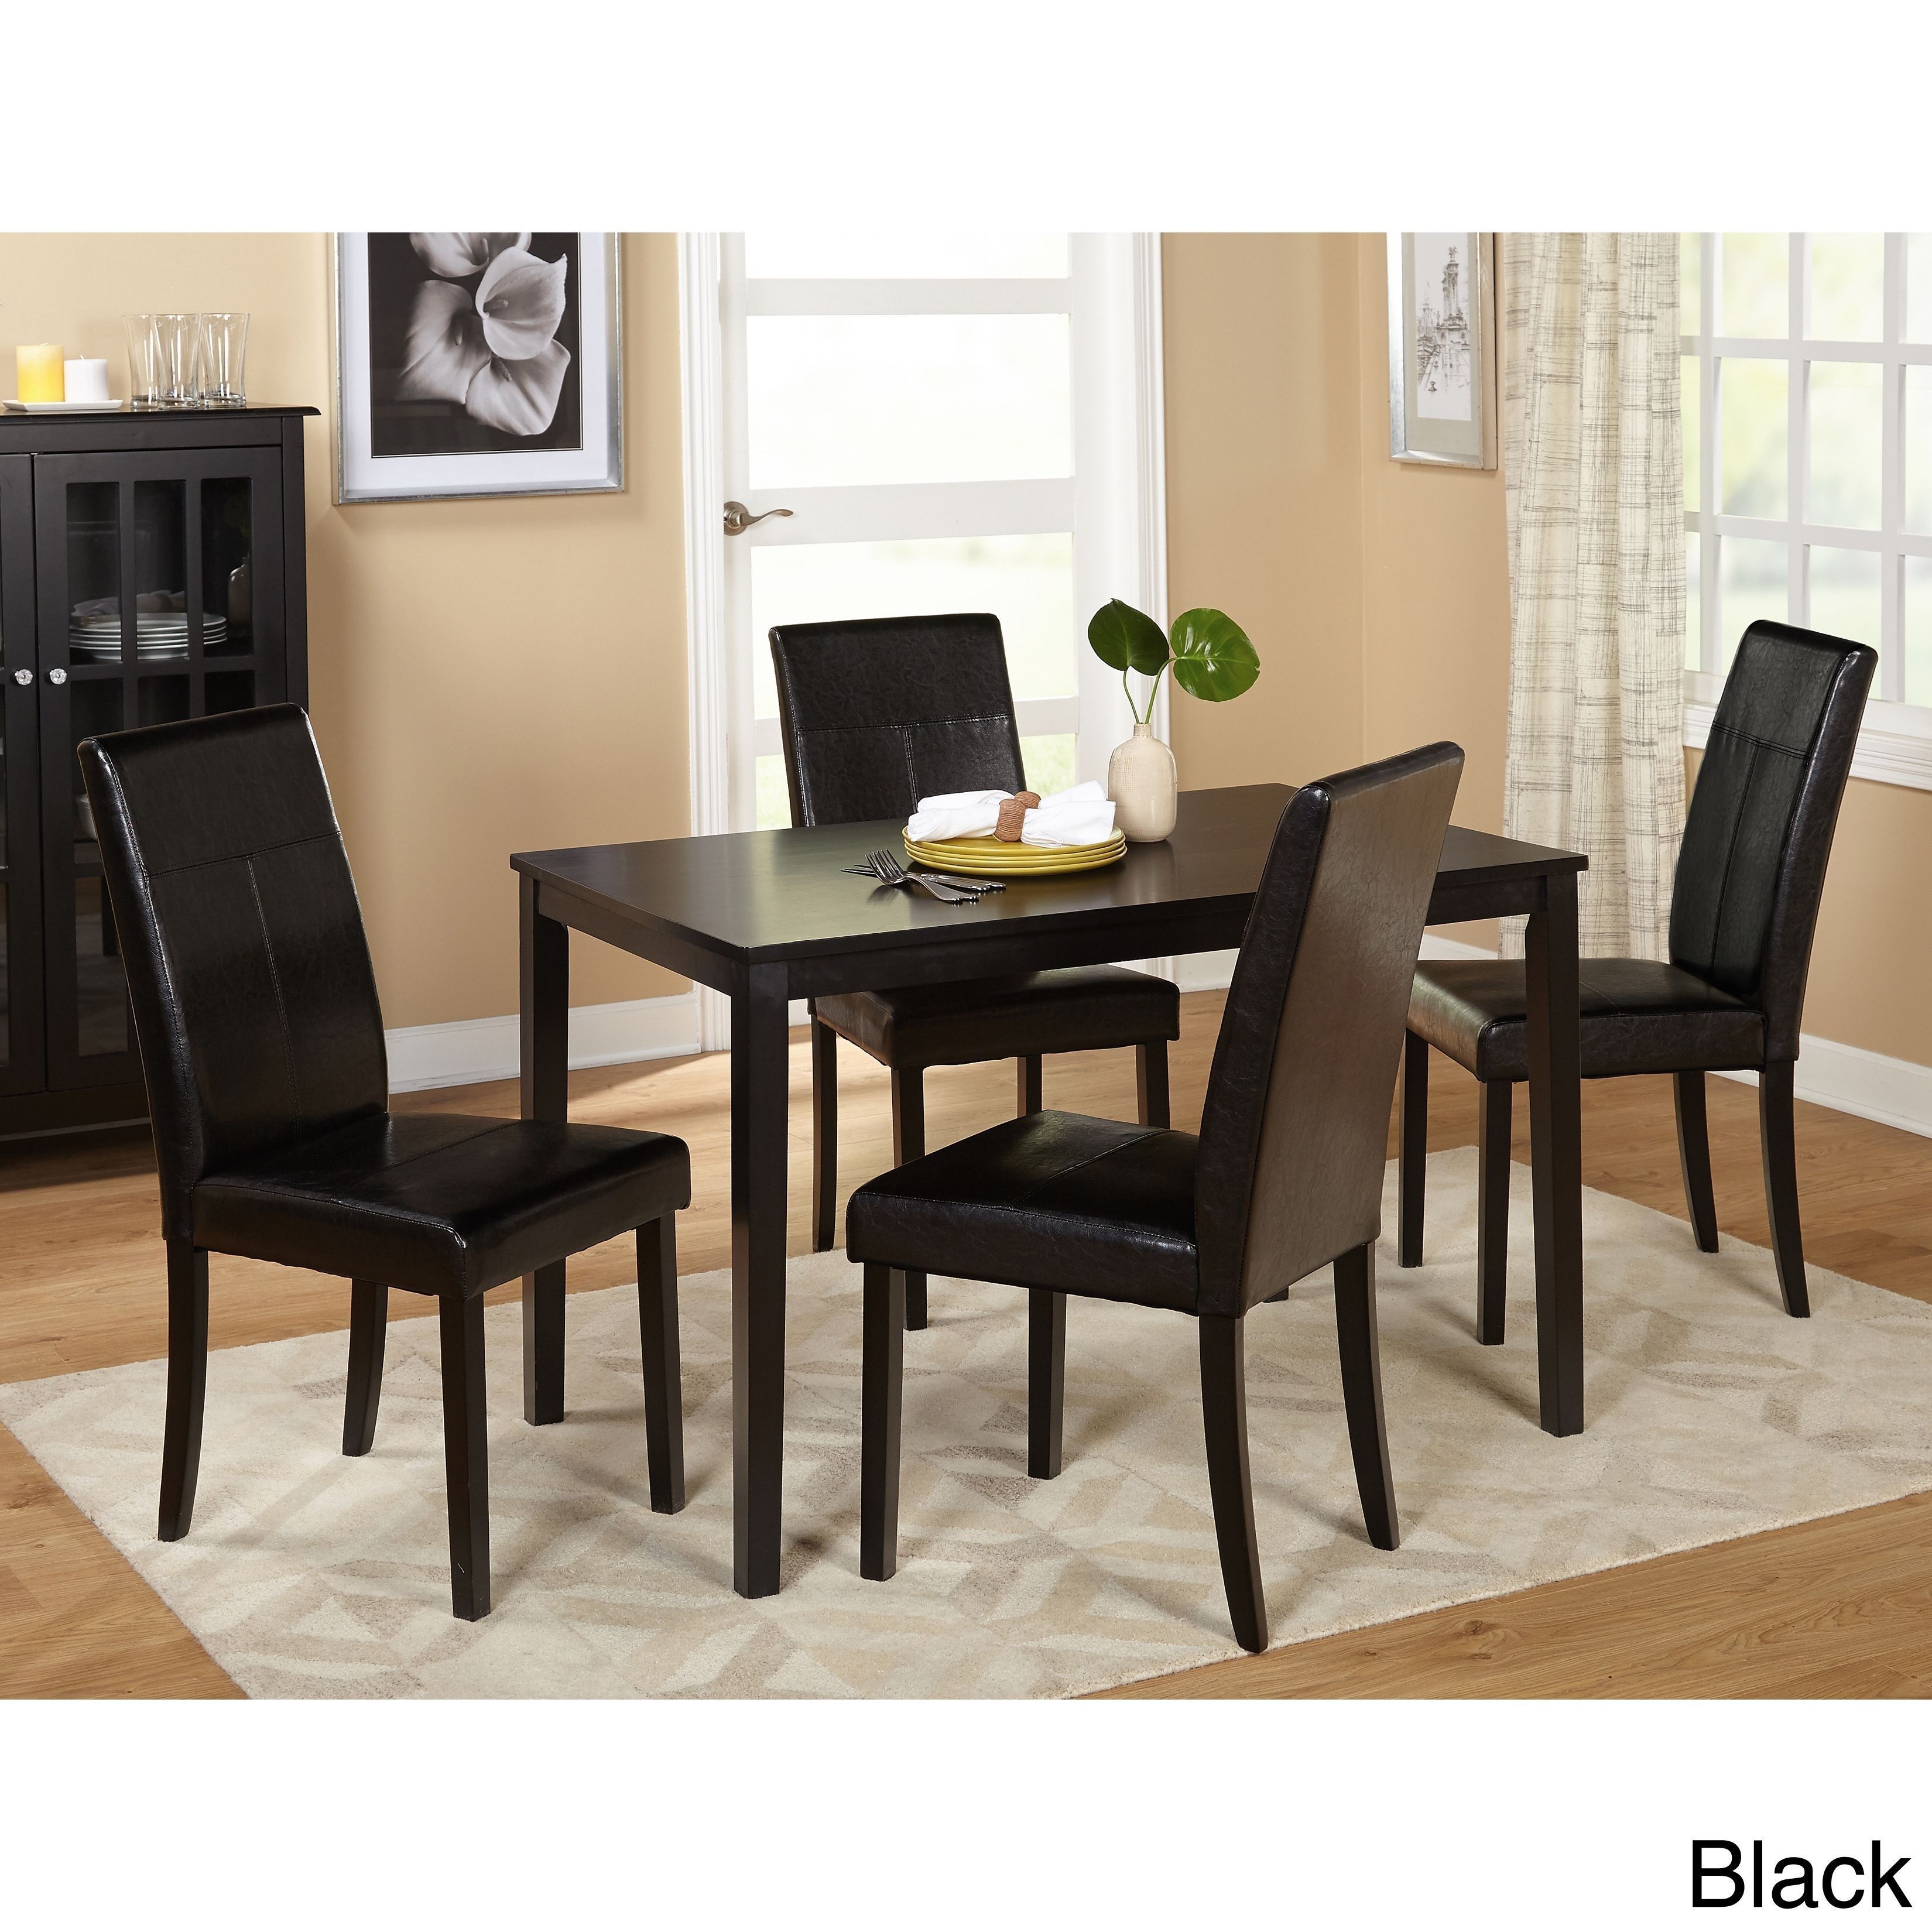 Toby 7 Piece Dining Setorren Ellis Reviews With Regard To Most Up To Date Lassen 7 Piece Extension Rectangle Dining Sets (View 11 of 20)